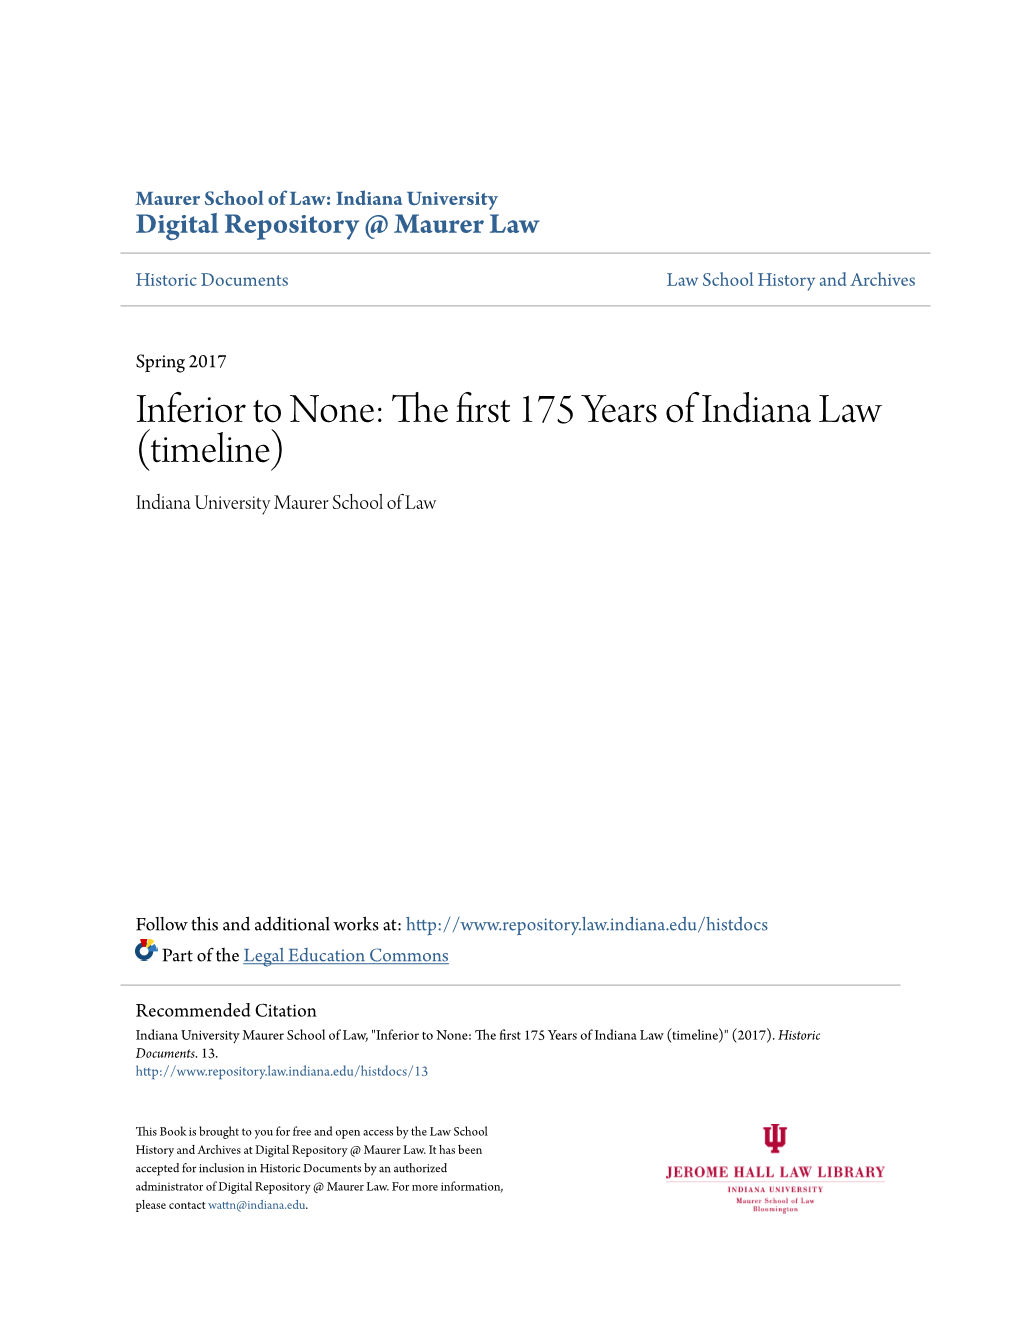 Inferior to None: the First 175 Years of Indiana Law (Timeline) Indiana University Maurer School of Law